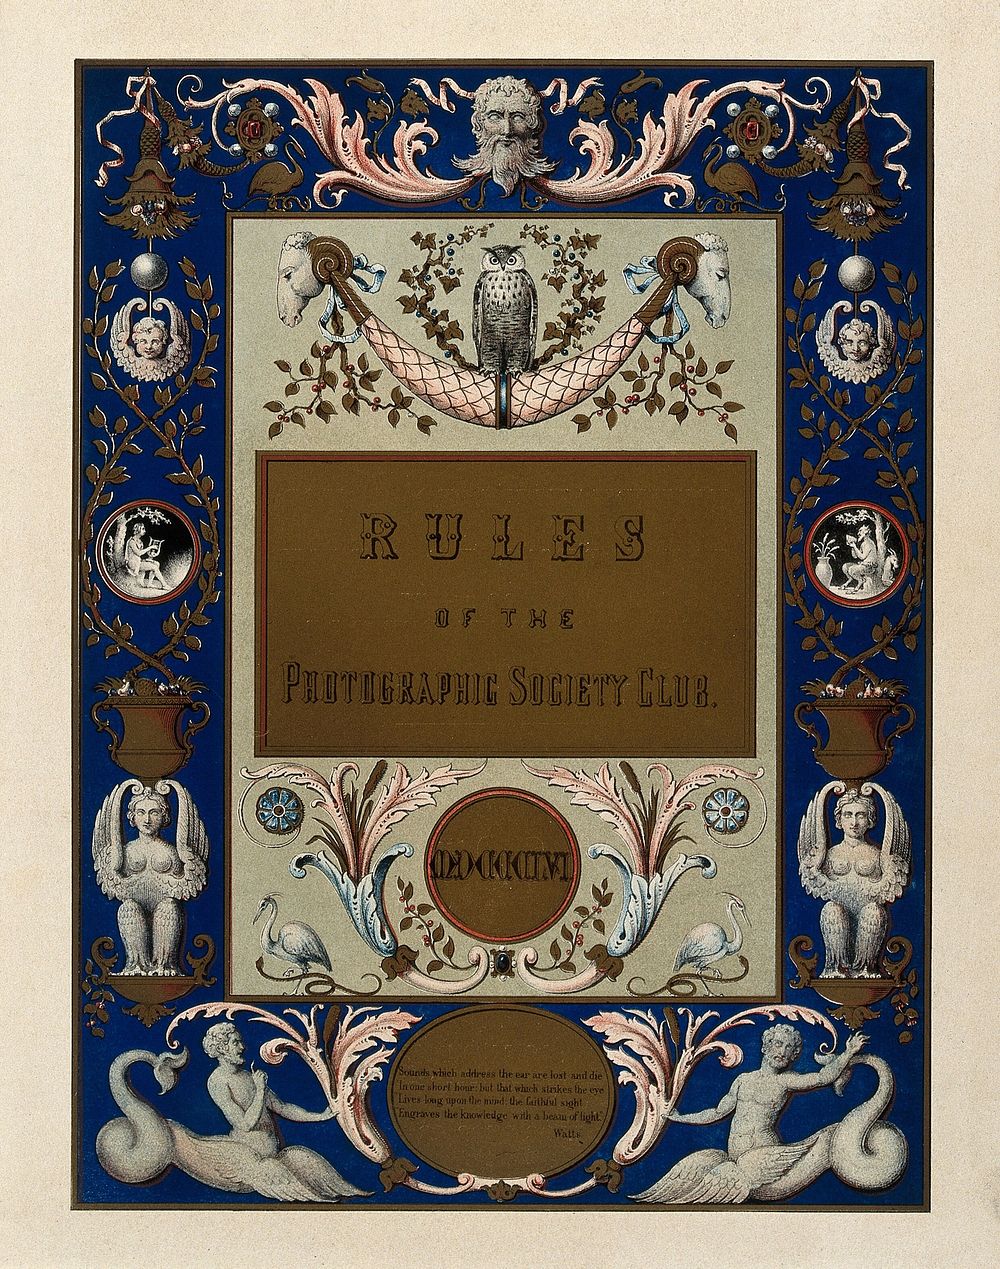 Rules of the Photographic Society Club: title page. Colour lithograph, 1856.